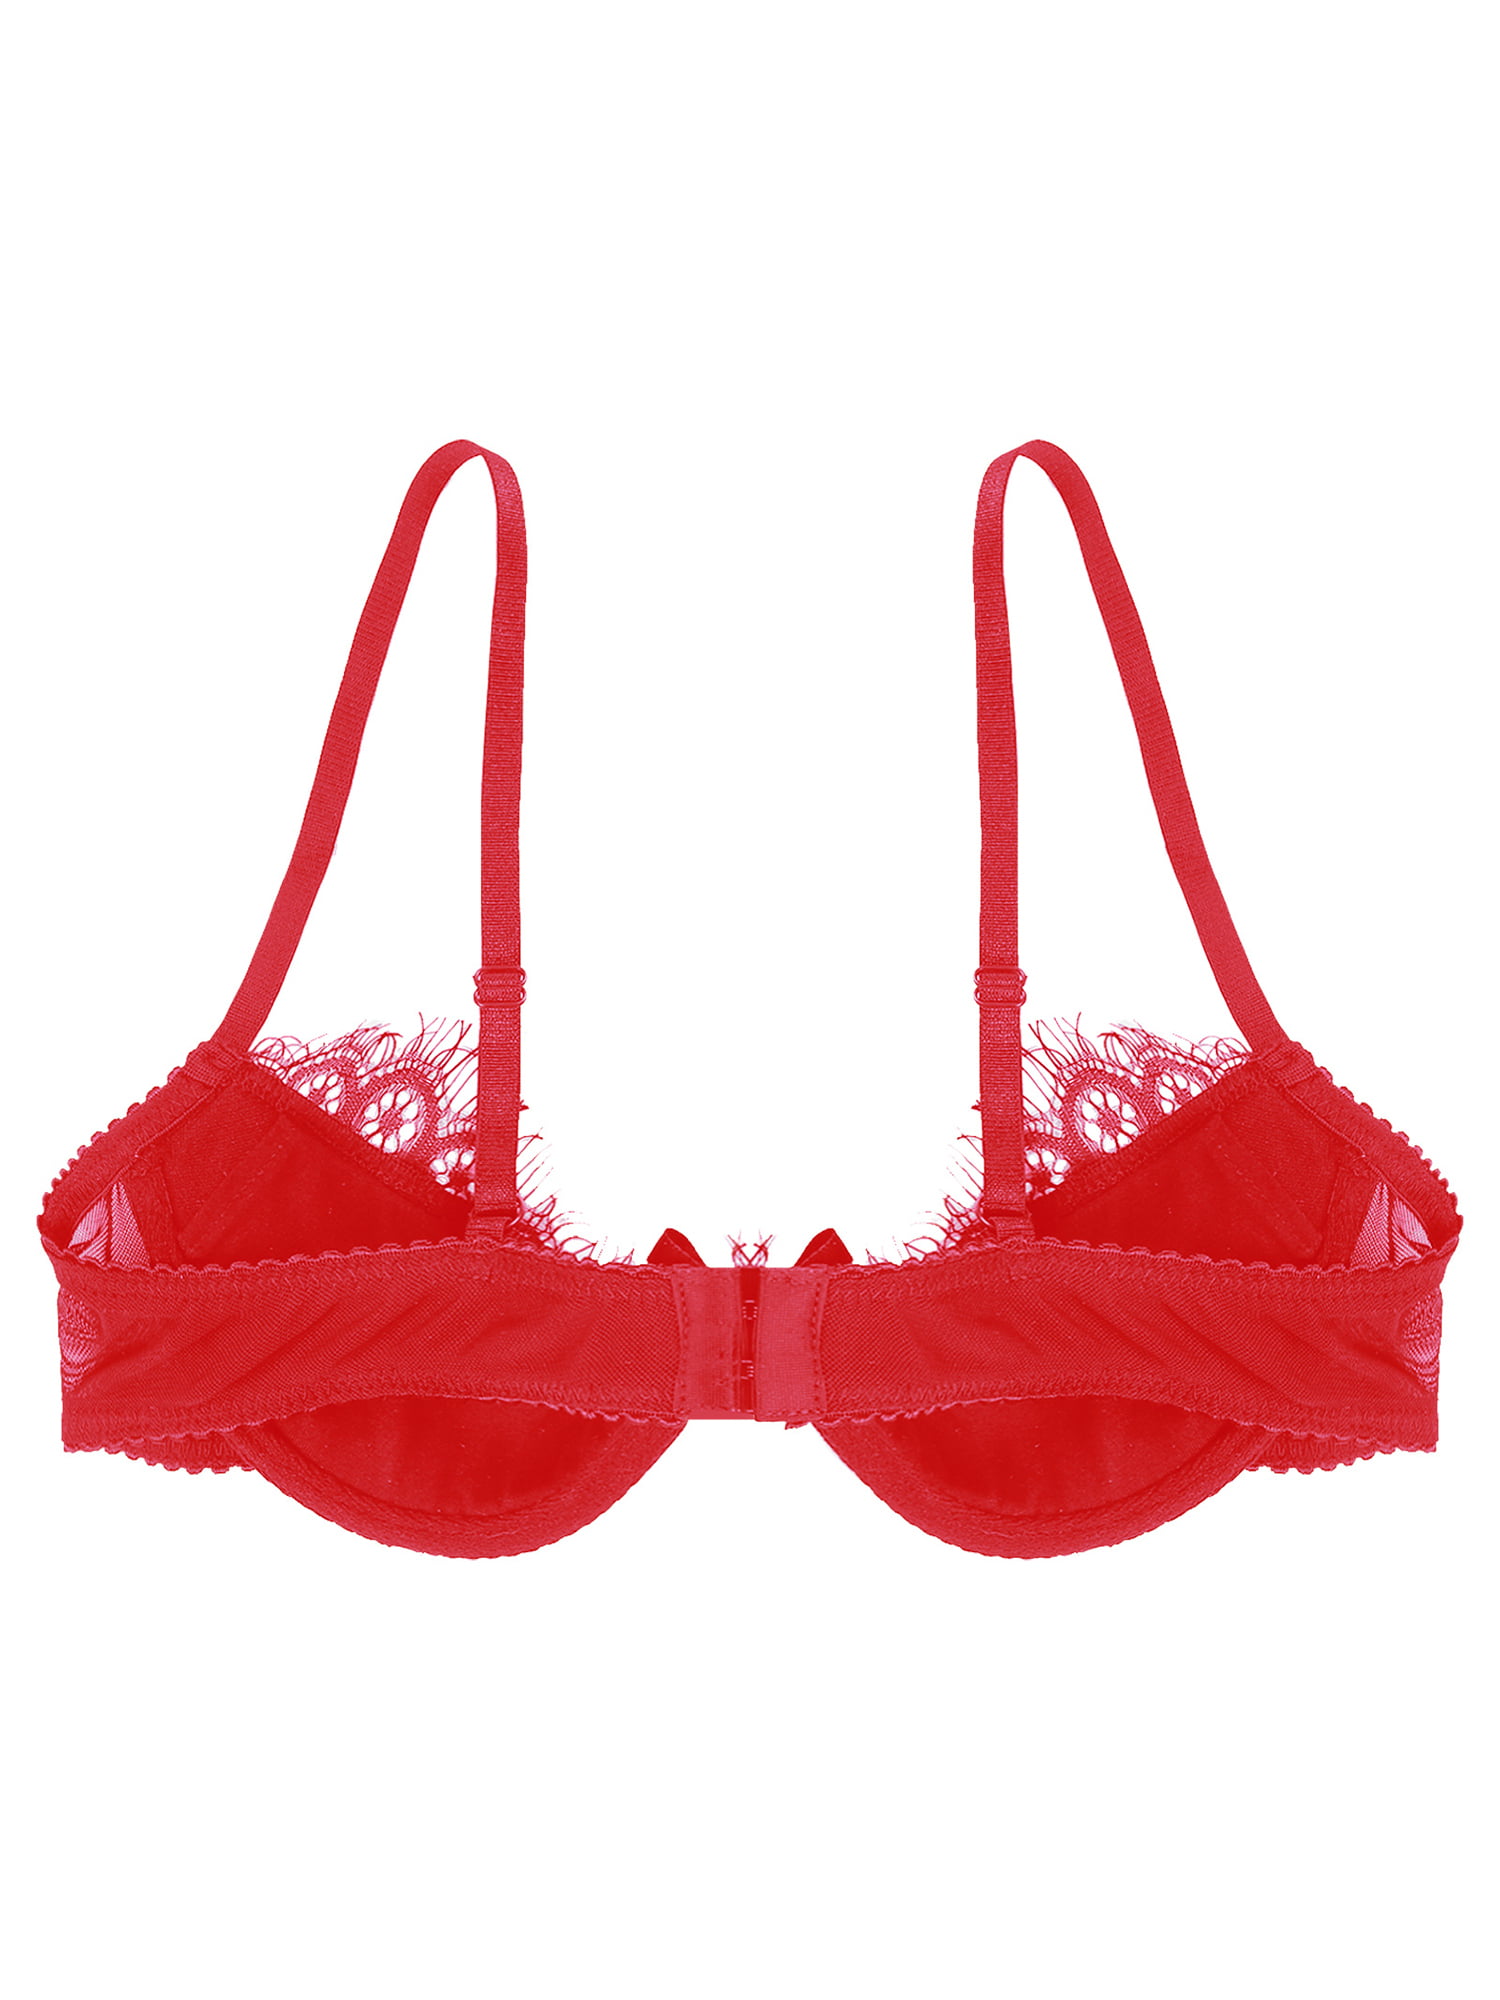 Embroidered Lace Push Up Bra Womens Underwire Lace Padded Bra Lingerie In  Multiple Sizes 32 44 Plunge Lancer 210728 From Lu02, $13.65